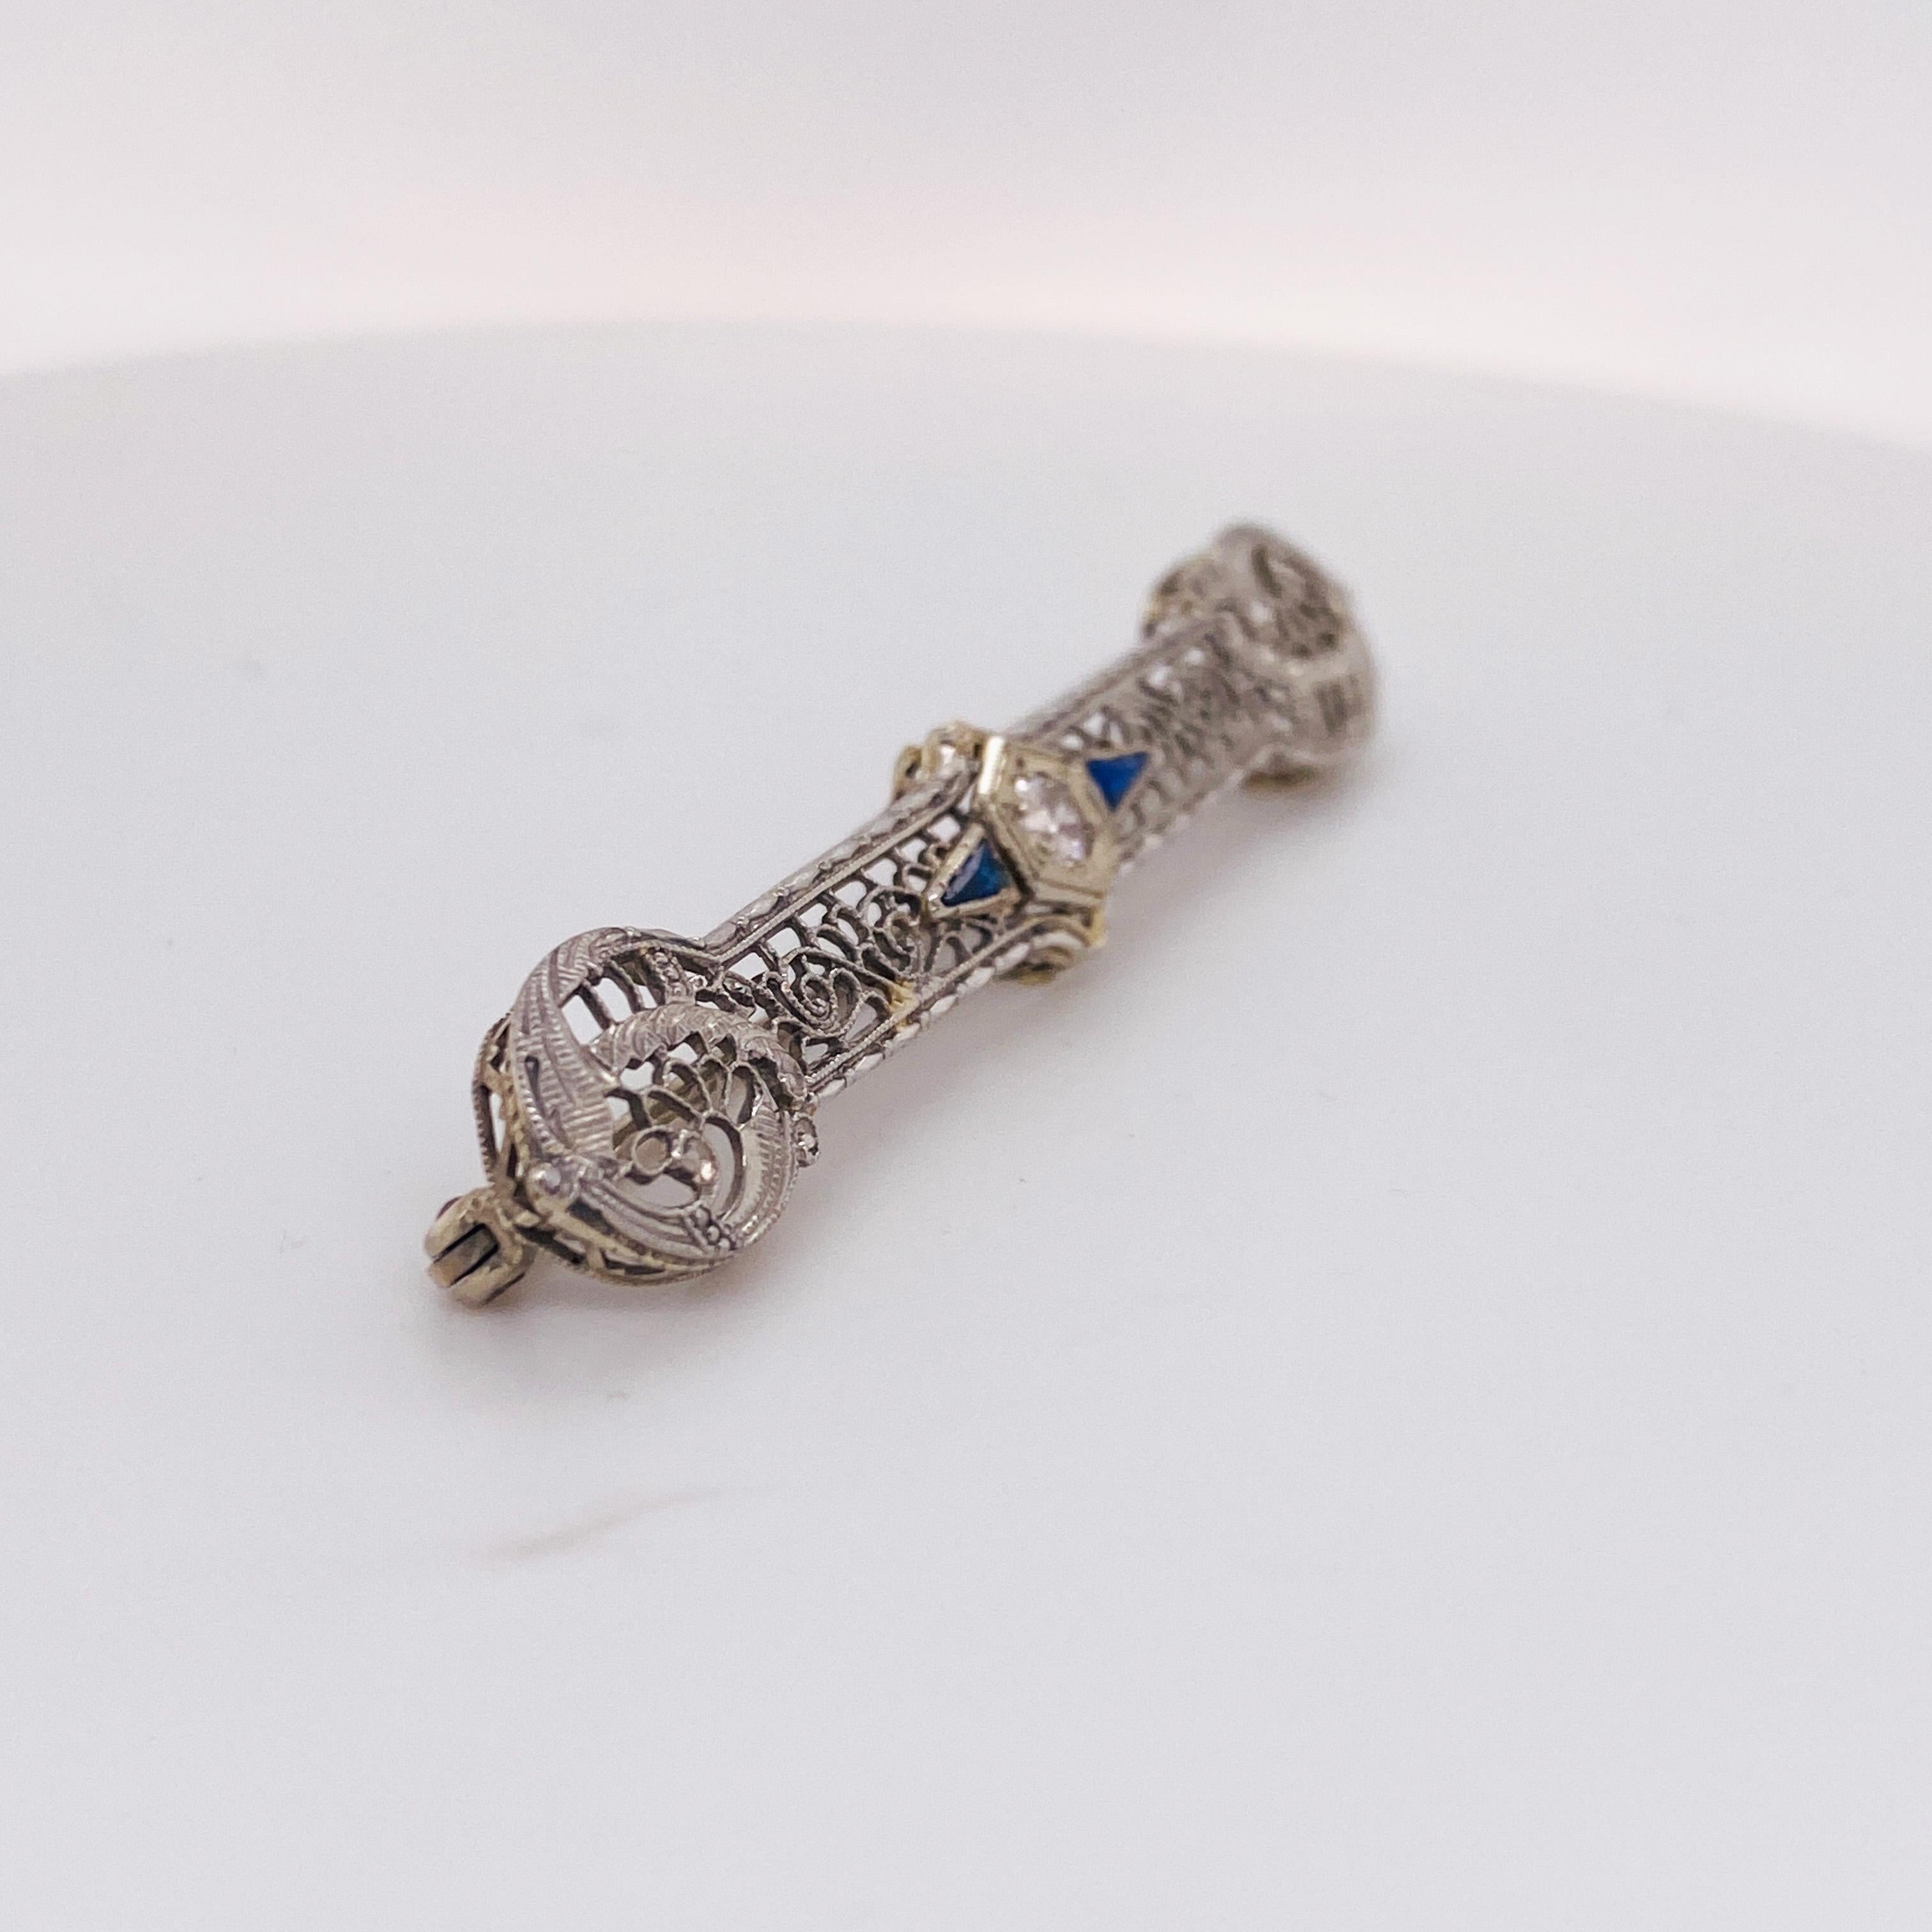 Vintage Floral Filigree European Diamond .48 Cts and Sapphire Brooch in 14kwg LV In Excellent Condition For Sale In Austin, TX